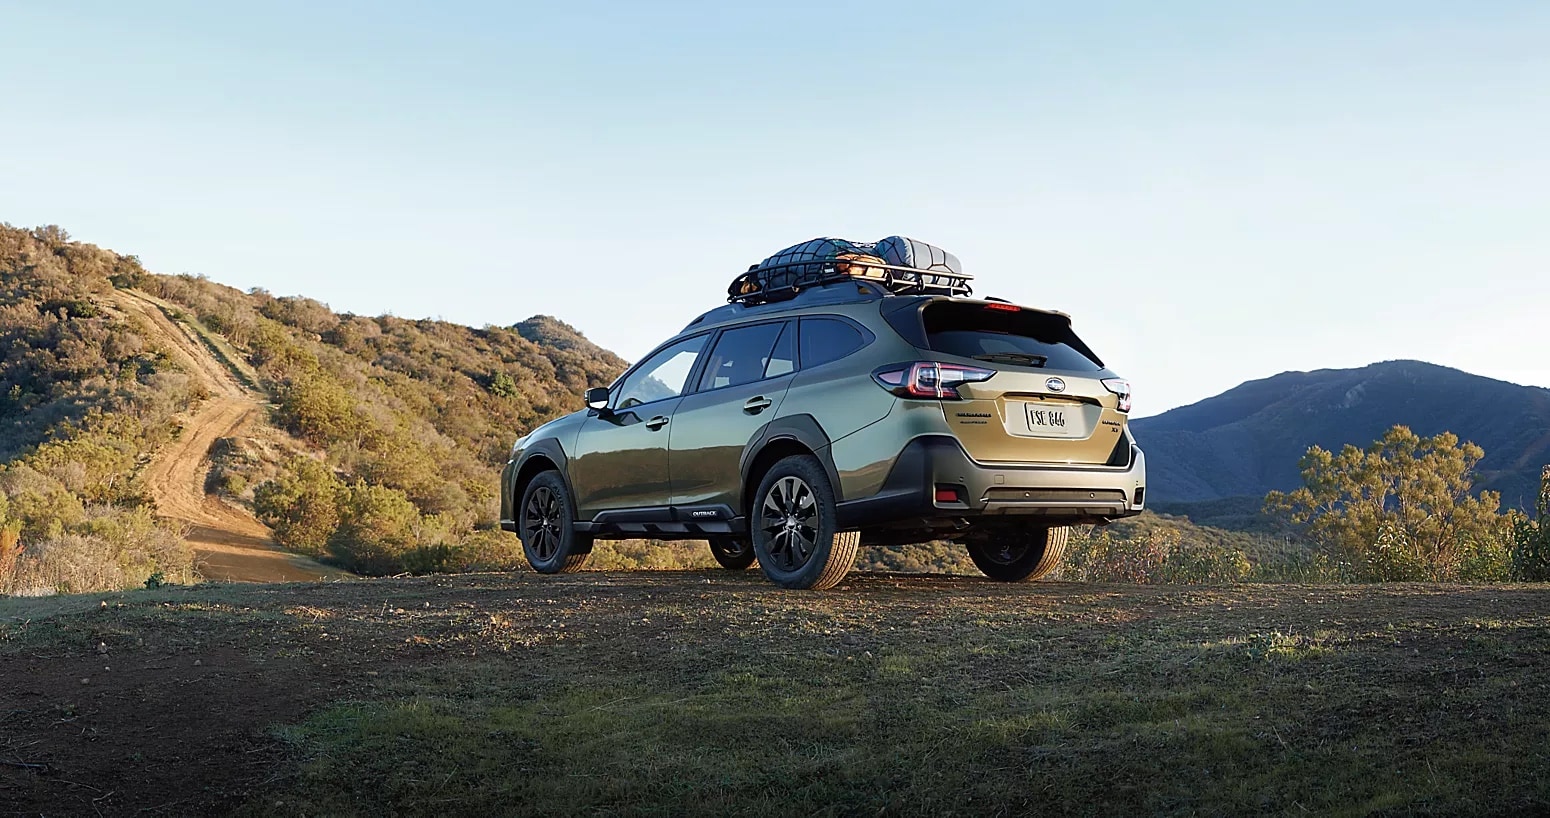 A Subaru Outback sits in a mountainous natural area with camping gear strapped onto on the roof rack.